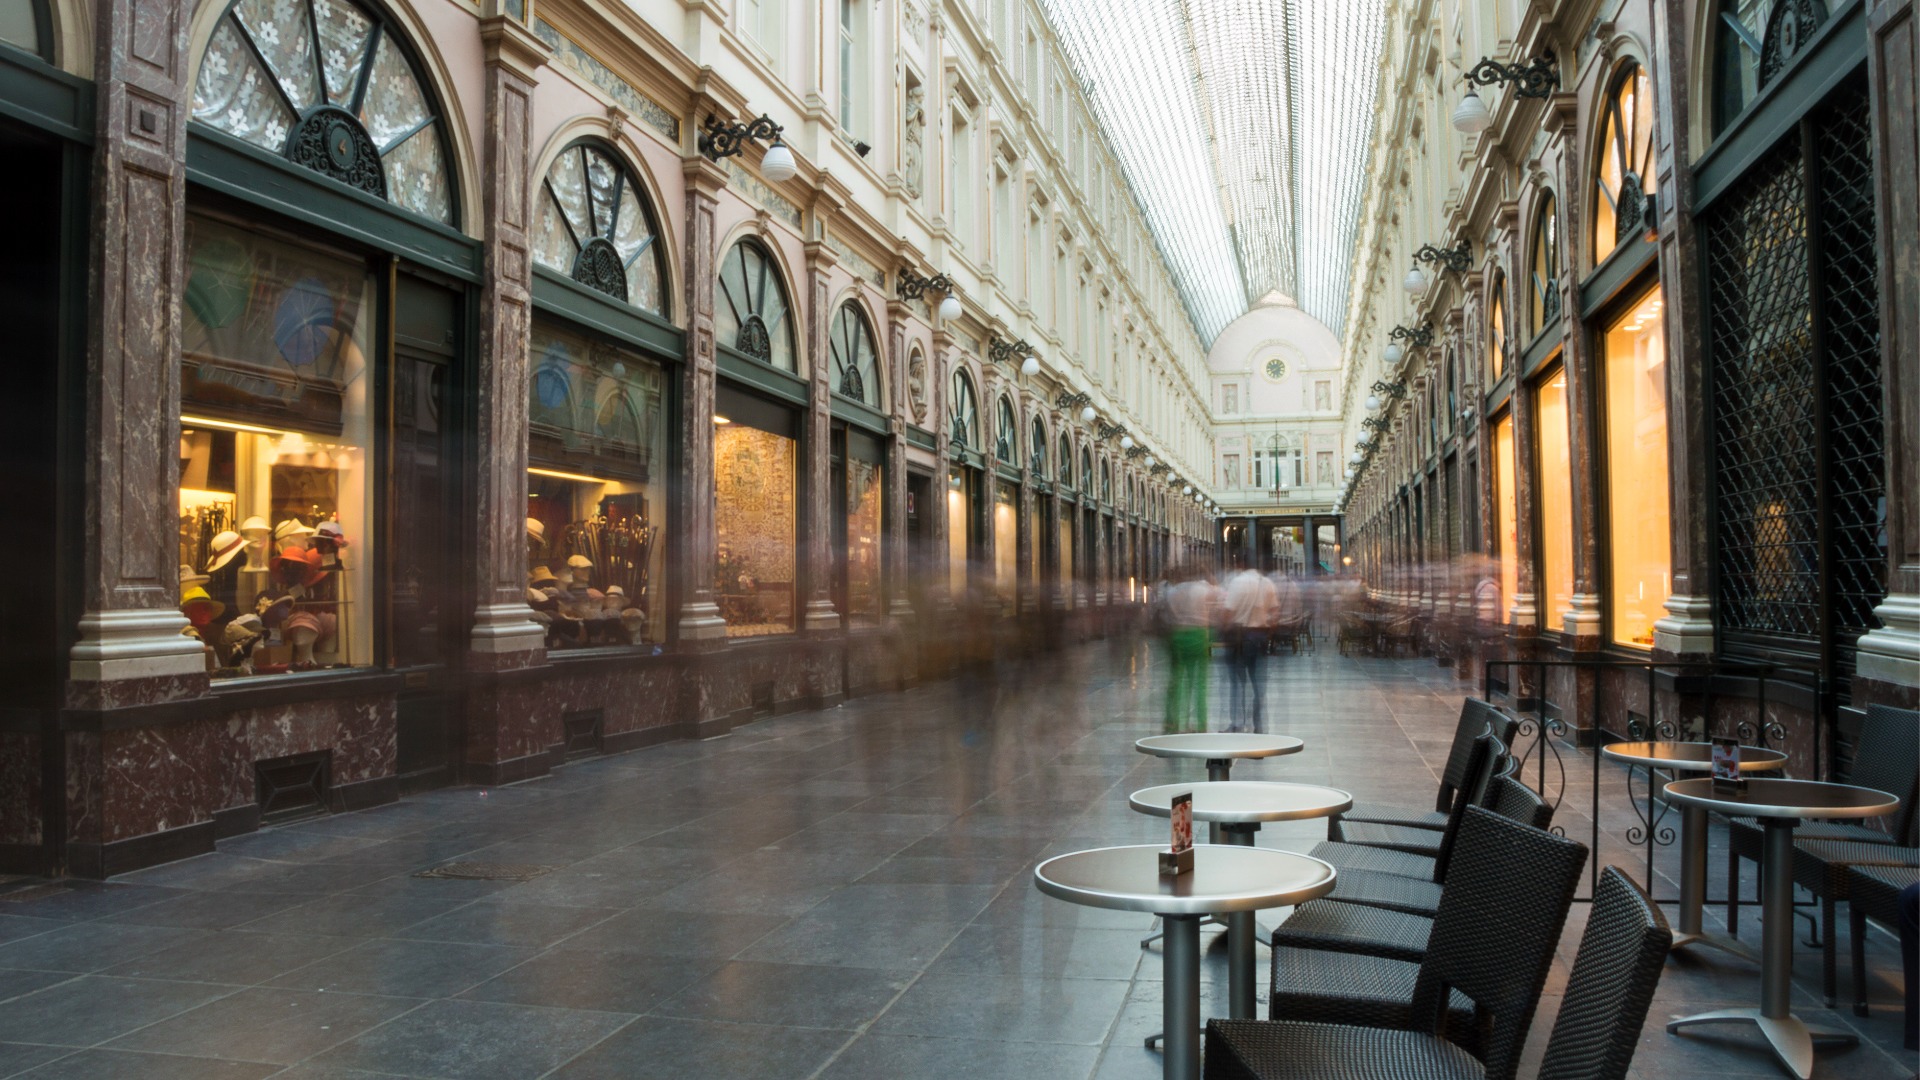 This images shows a corridor inside Galeries Royal Saint Hubert with a glass roof over it. 